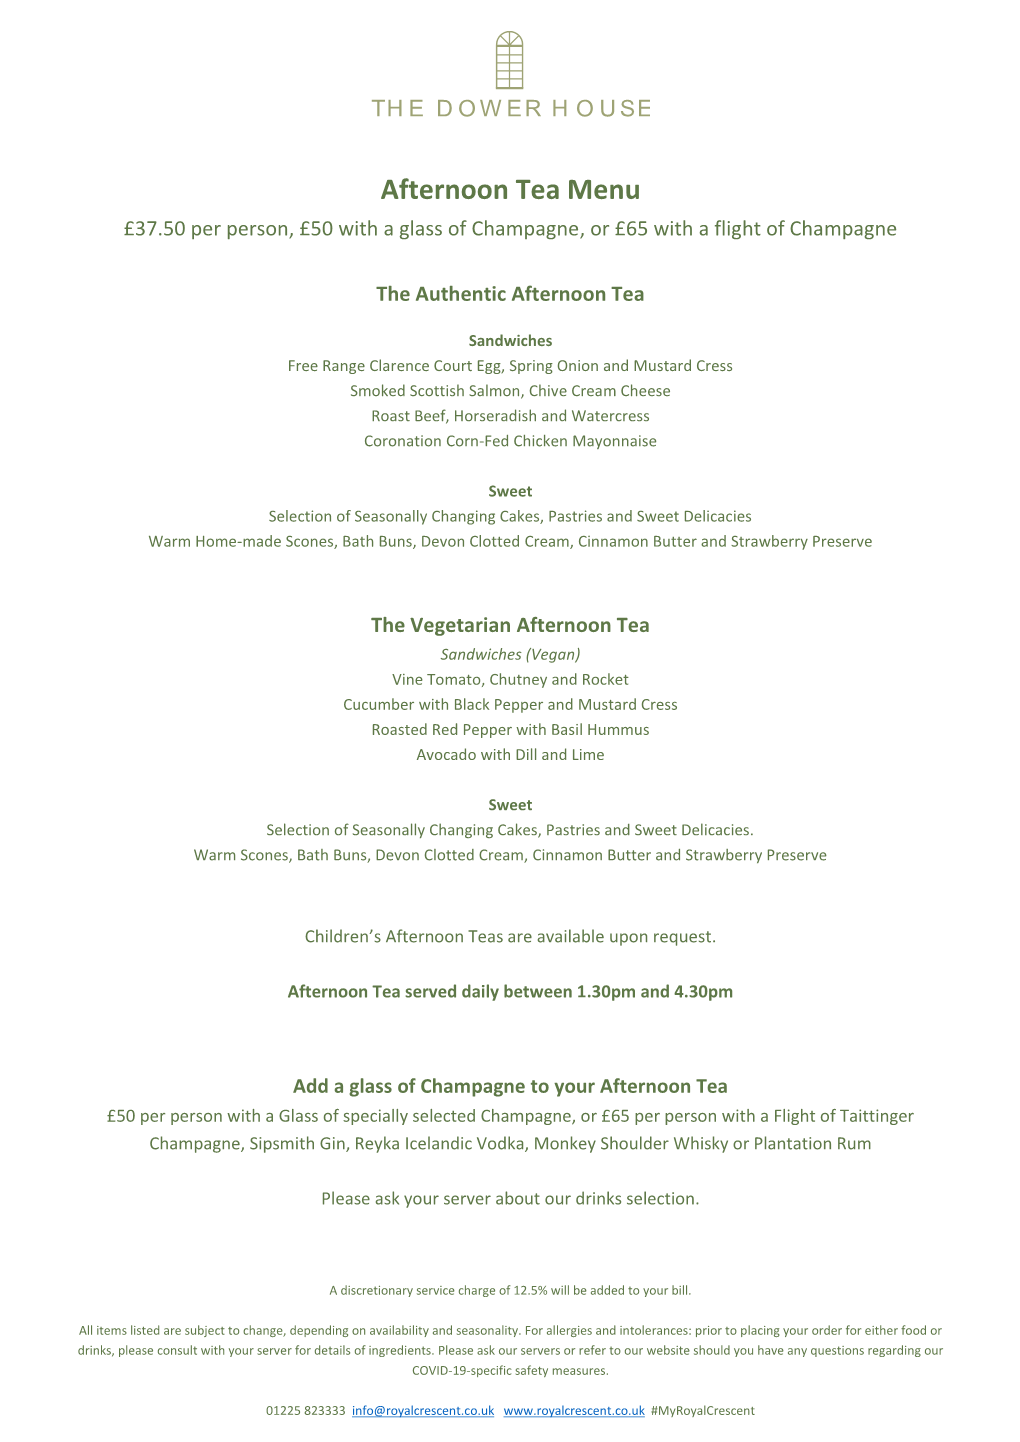 Afternoon Tea Menu £37.50 Per Person, £50 with a Glass of Champagne, Or £65 with a Flight of Champagne